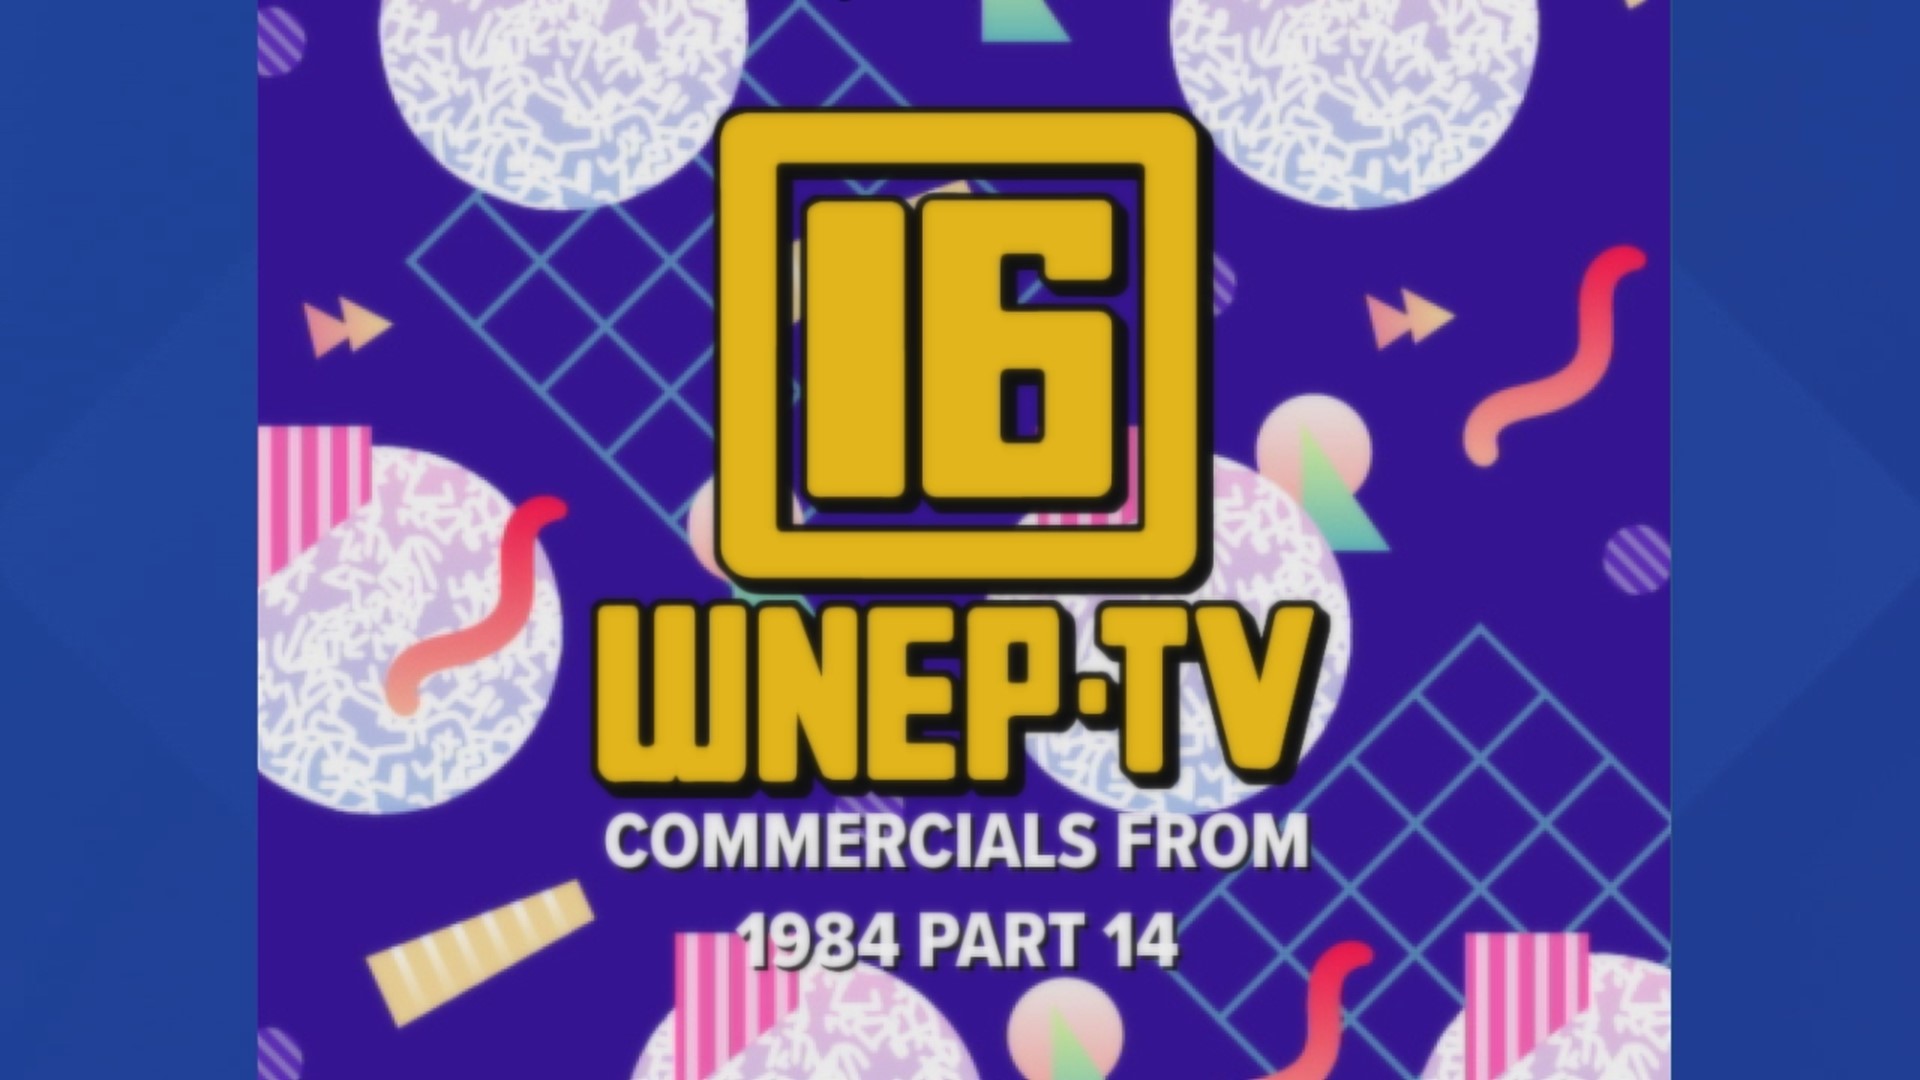 Watch some of the commercials that were on WNEP in 1984.